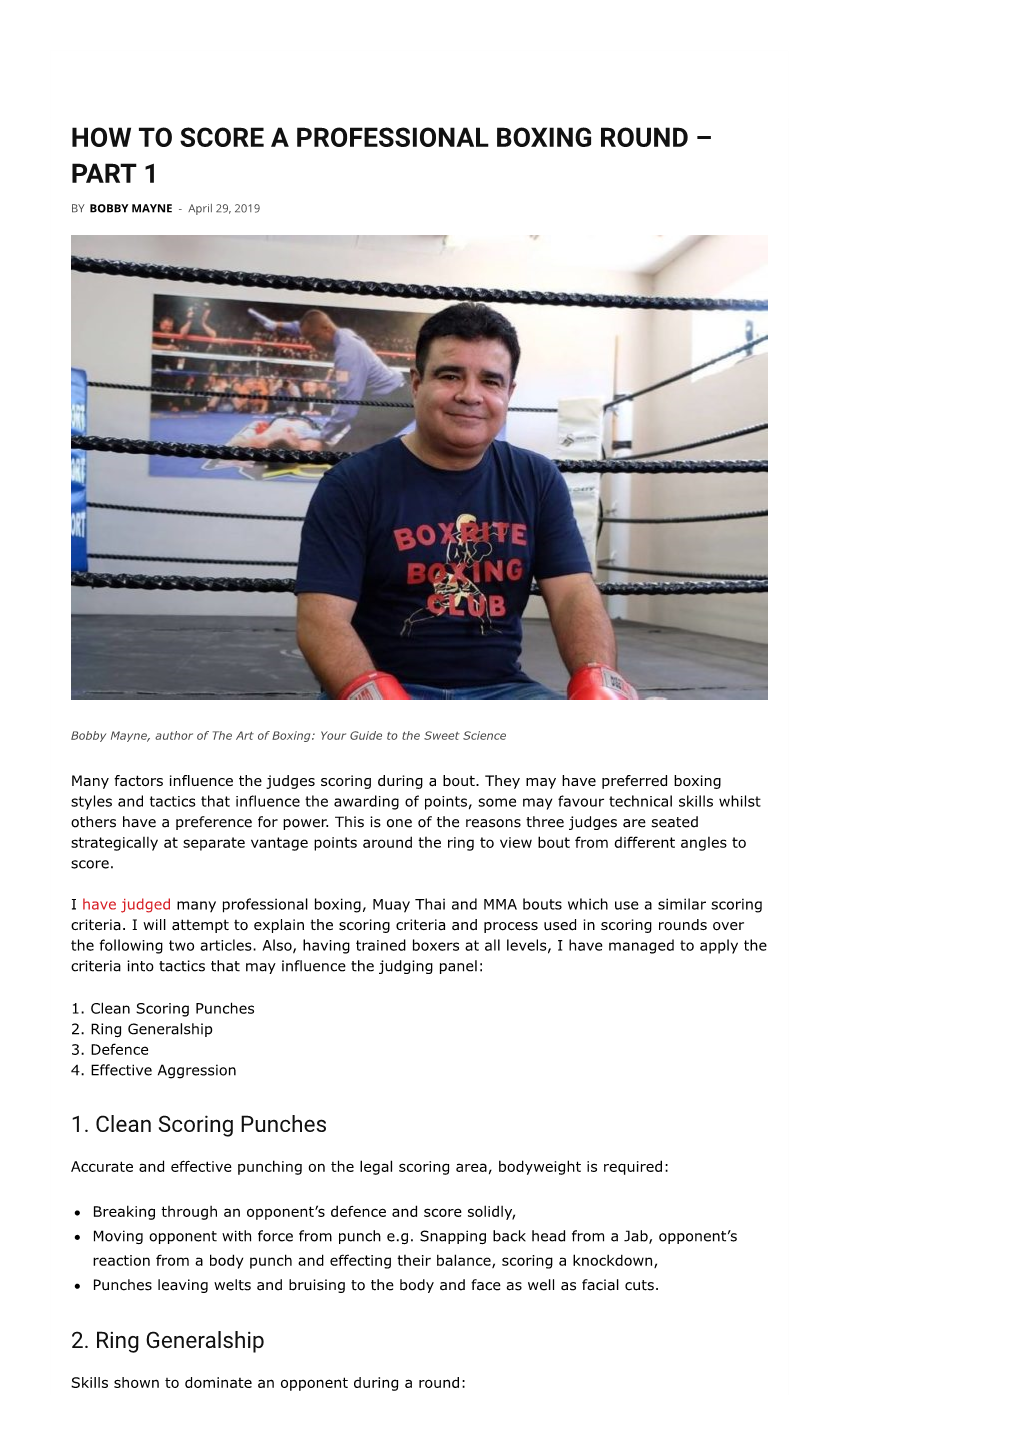 How to Score a Professional Boxing Round – Part 1